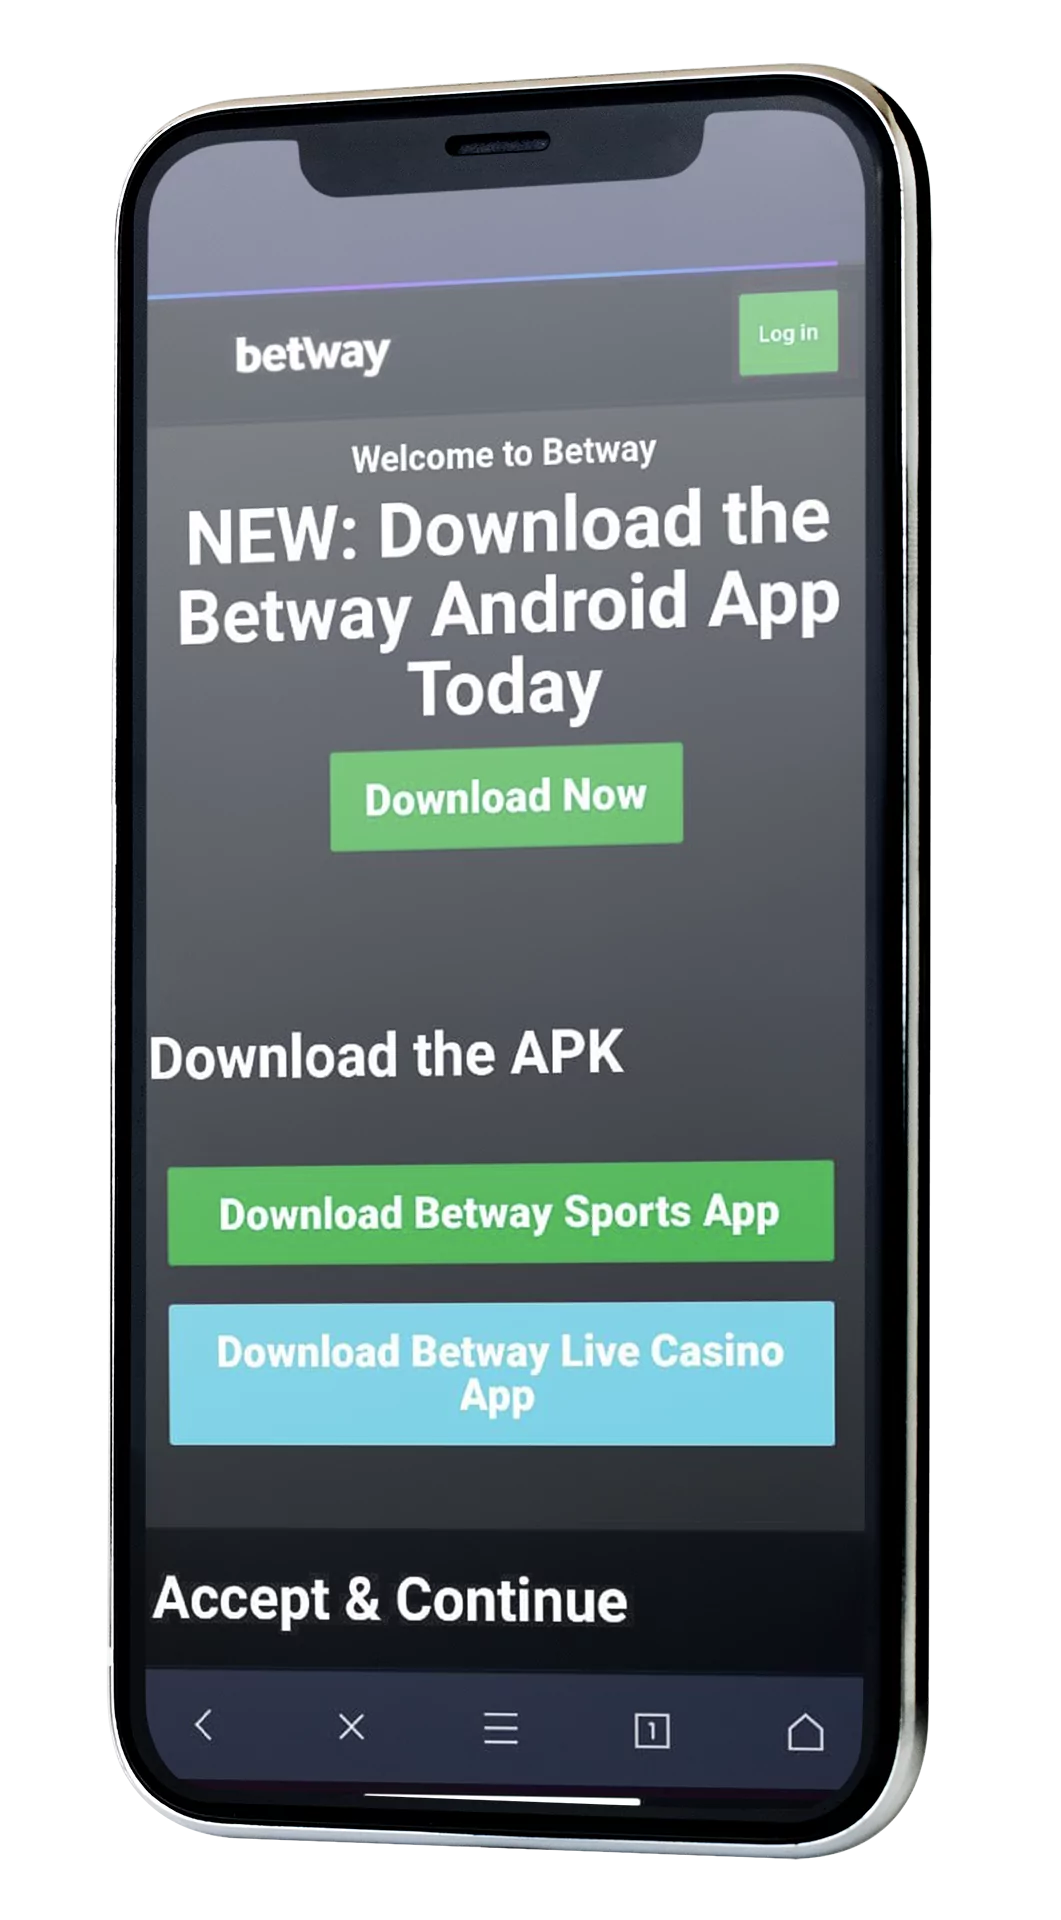 betway app download south africa download download Like A Pro With The Help Of These 5 Tips